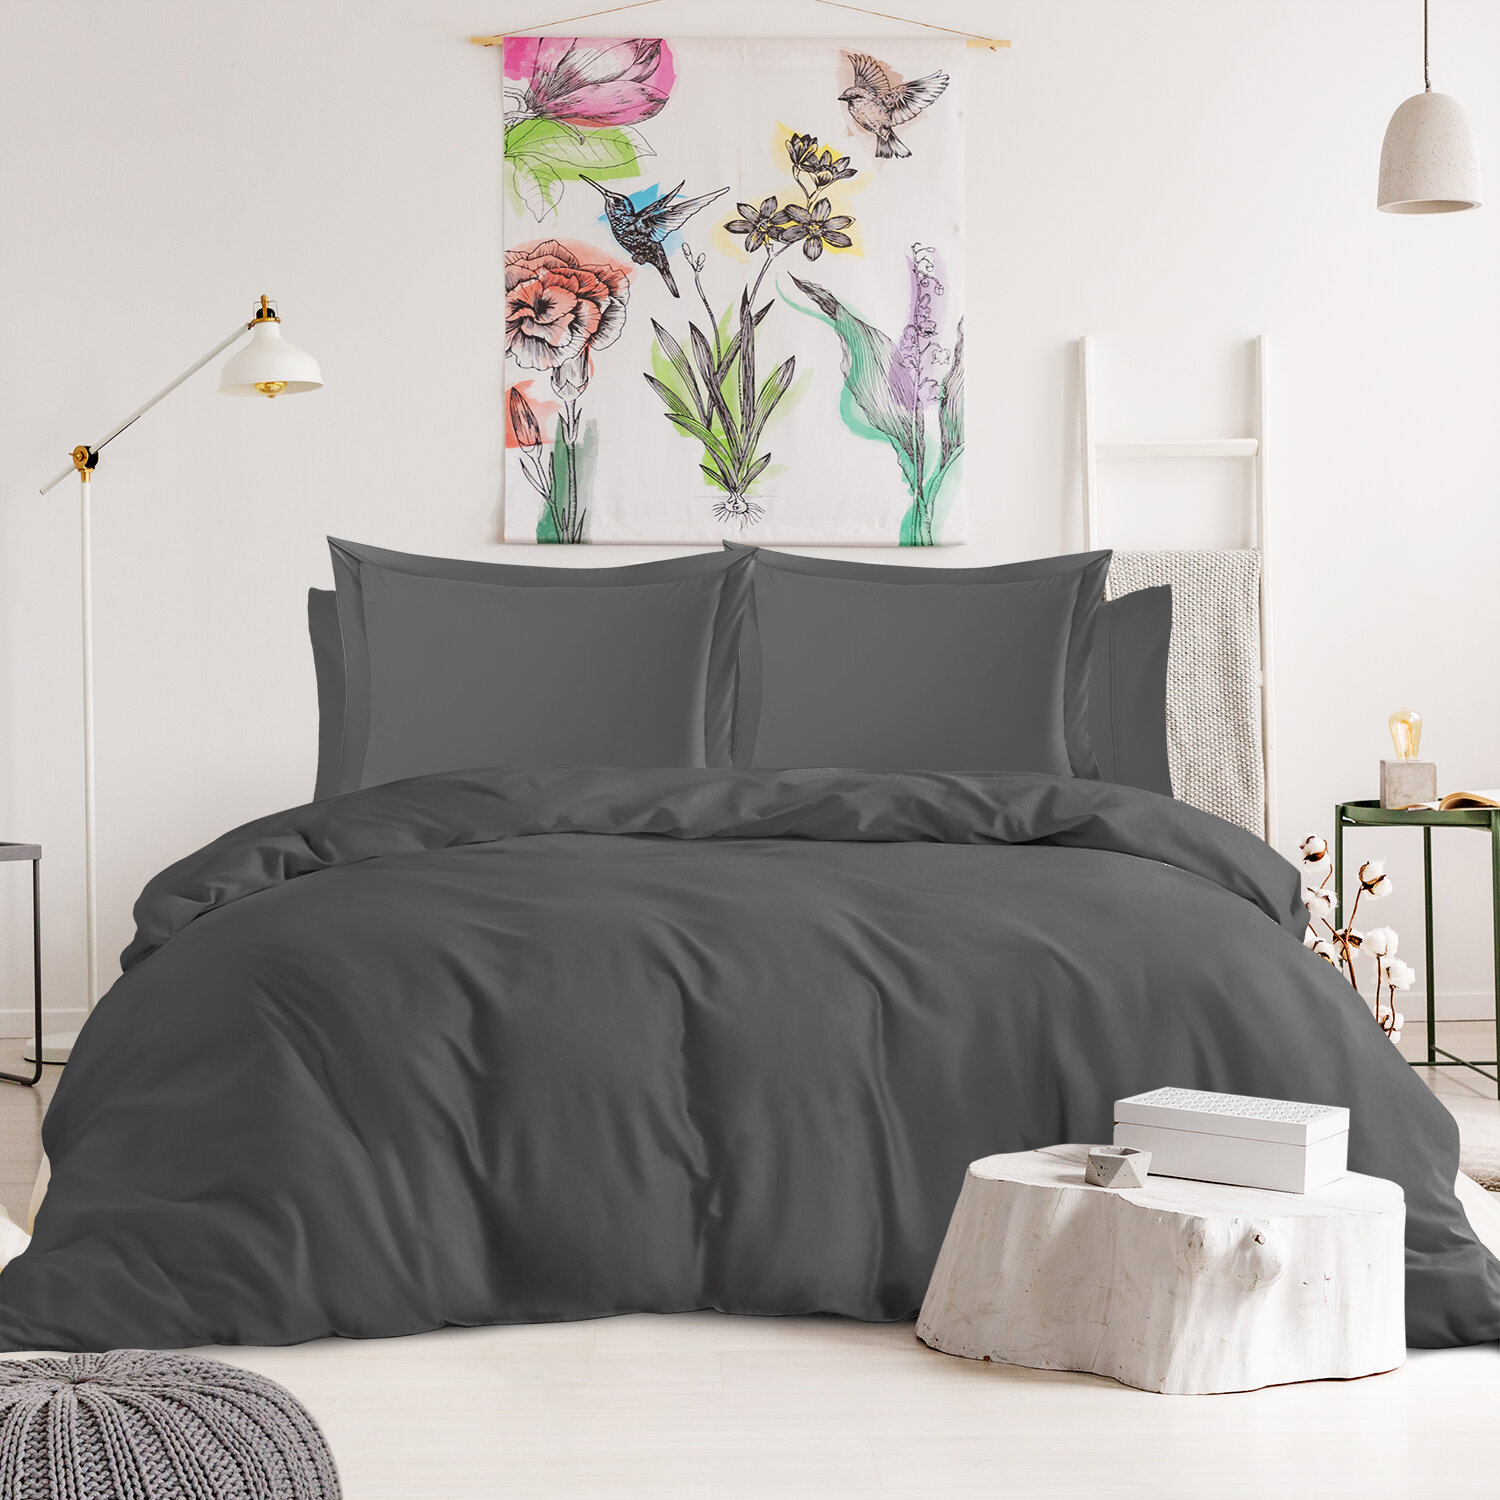 Nestl Bedding Duvet Cover, Protects and Covers Your Comforter / Duvet Insert, Luxury 100% Super Soft Microfiber, California King size, Color Black, 3